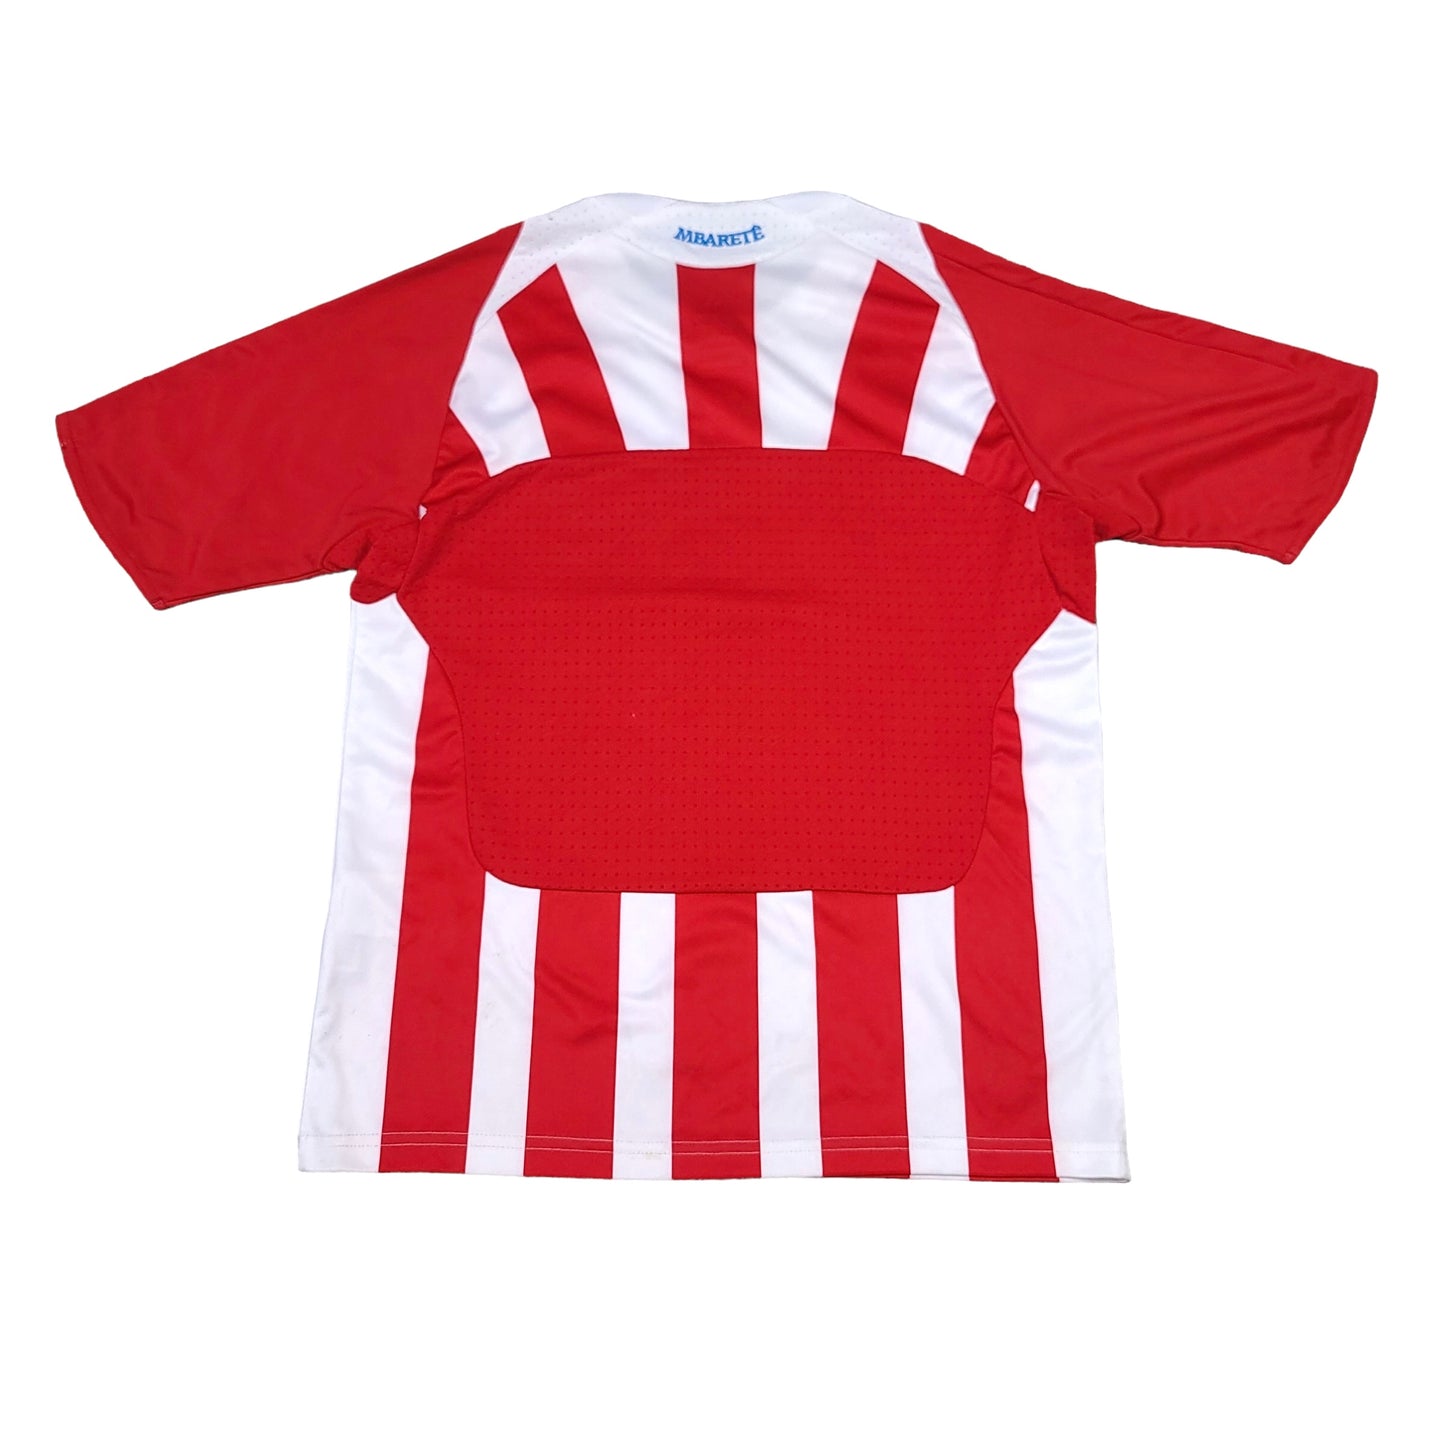 Paraguay adidas 2008 Youth Home Soccer Jersey